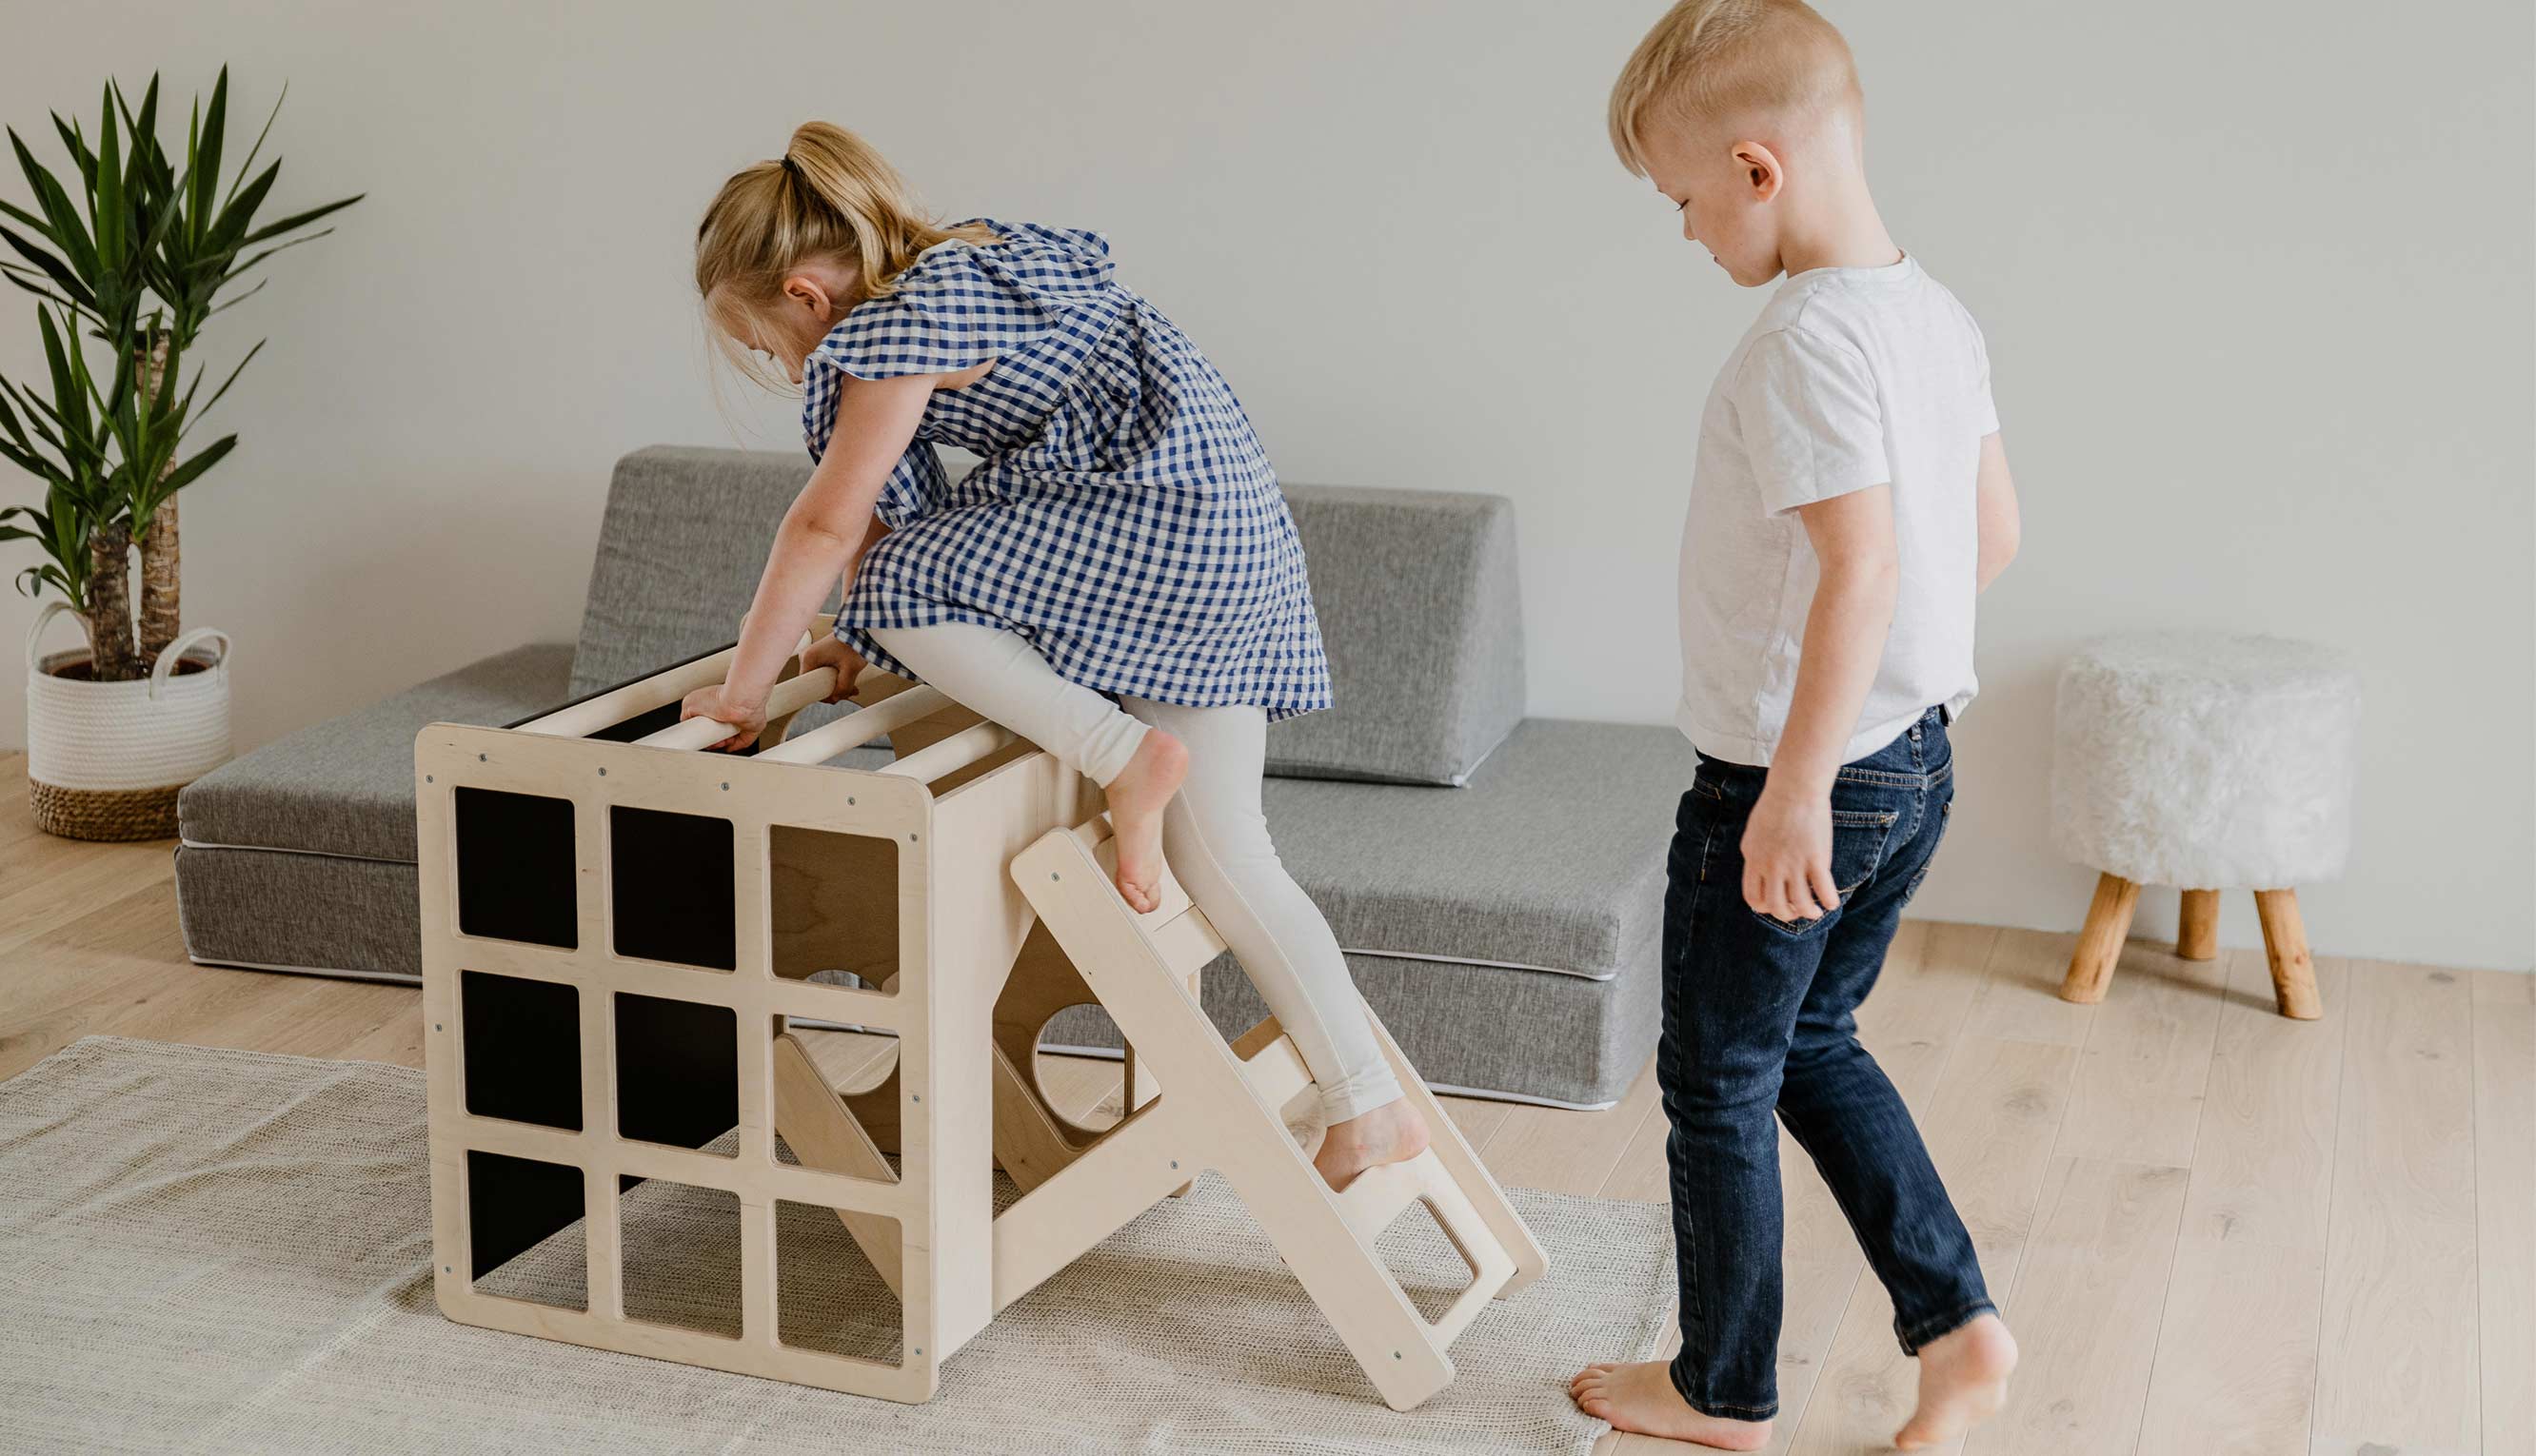 Two children playing with a wooden toy house in a living room.